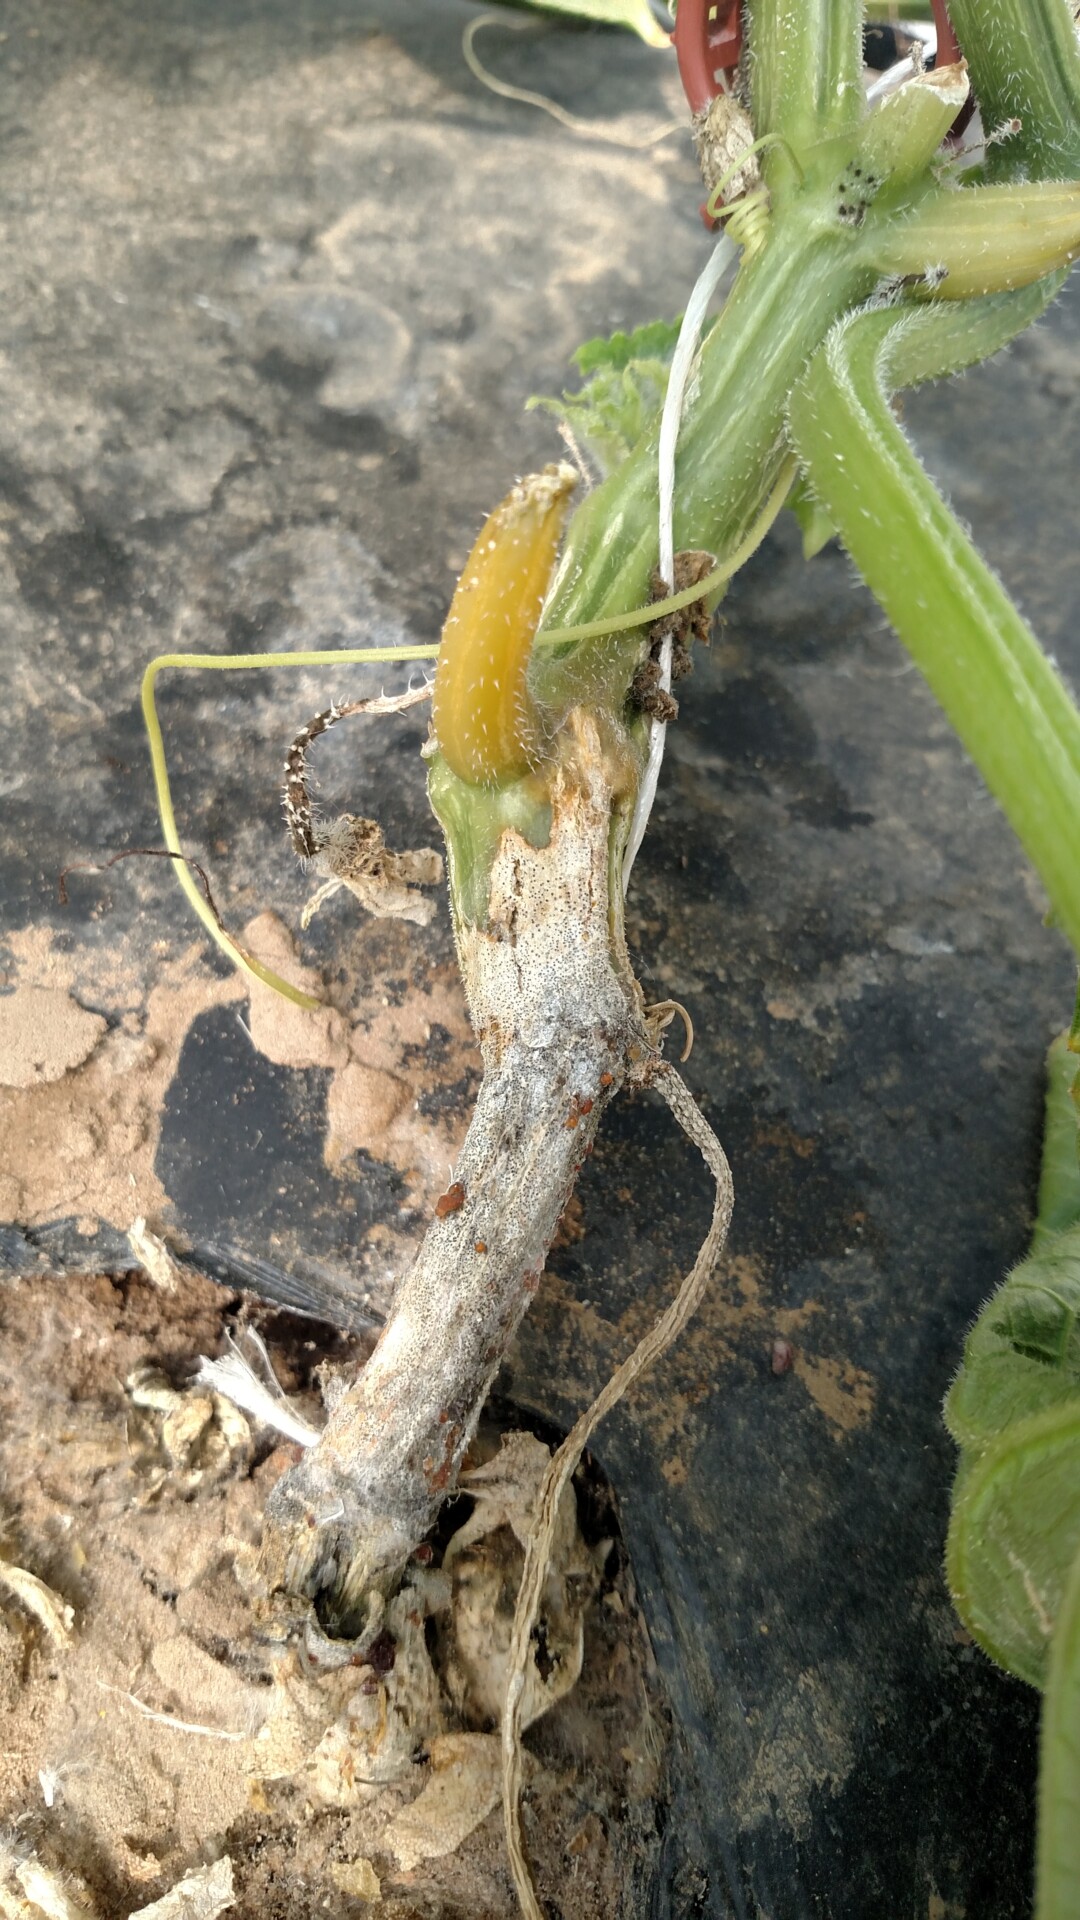 Figure 3. Charcoal rot of cucumber. Light gray lesion on stem with micro-sclerotia shown.